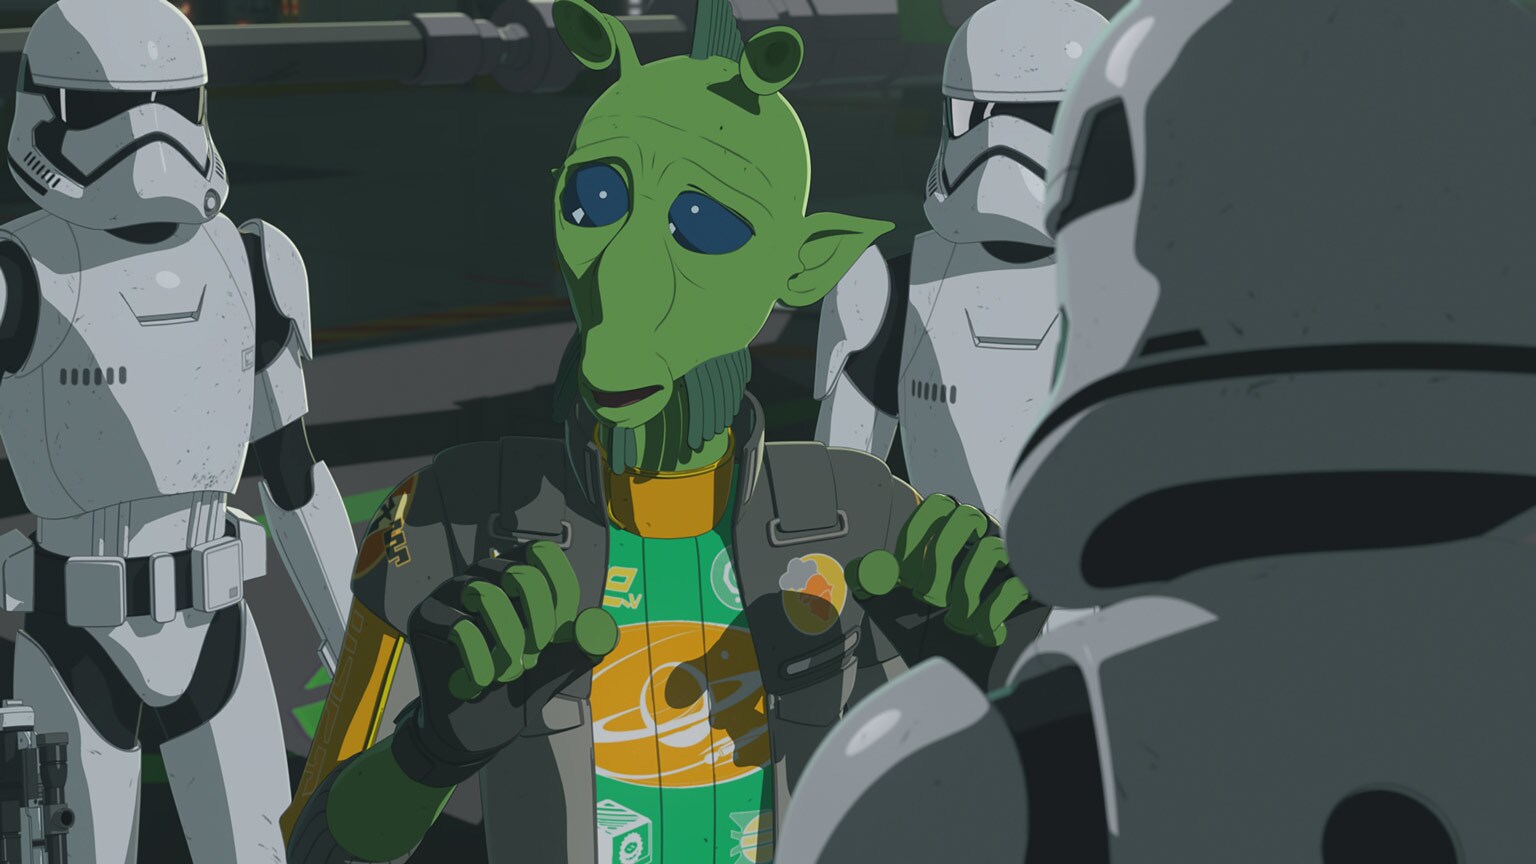 Bucket's List Extra: 6 Fun Facts from "The Disappeared" - Star Wars Resistance